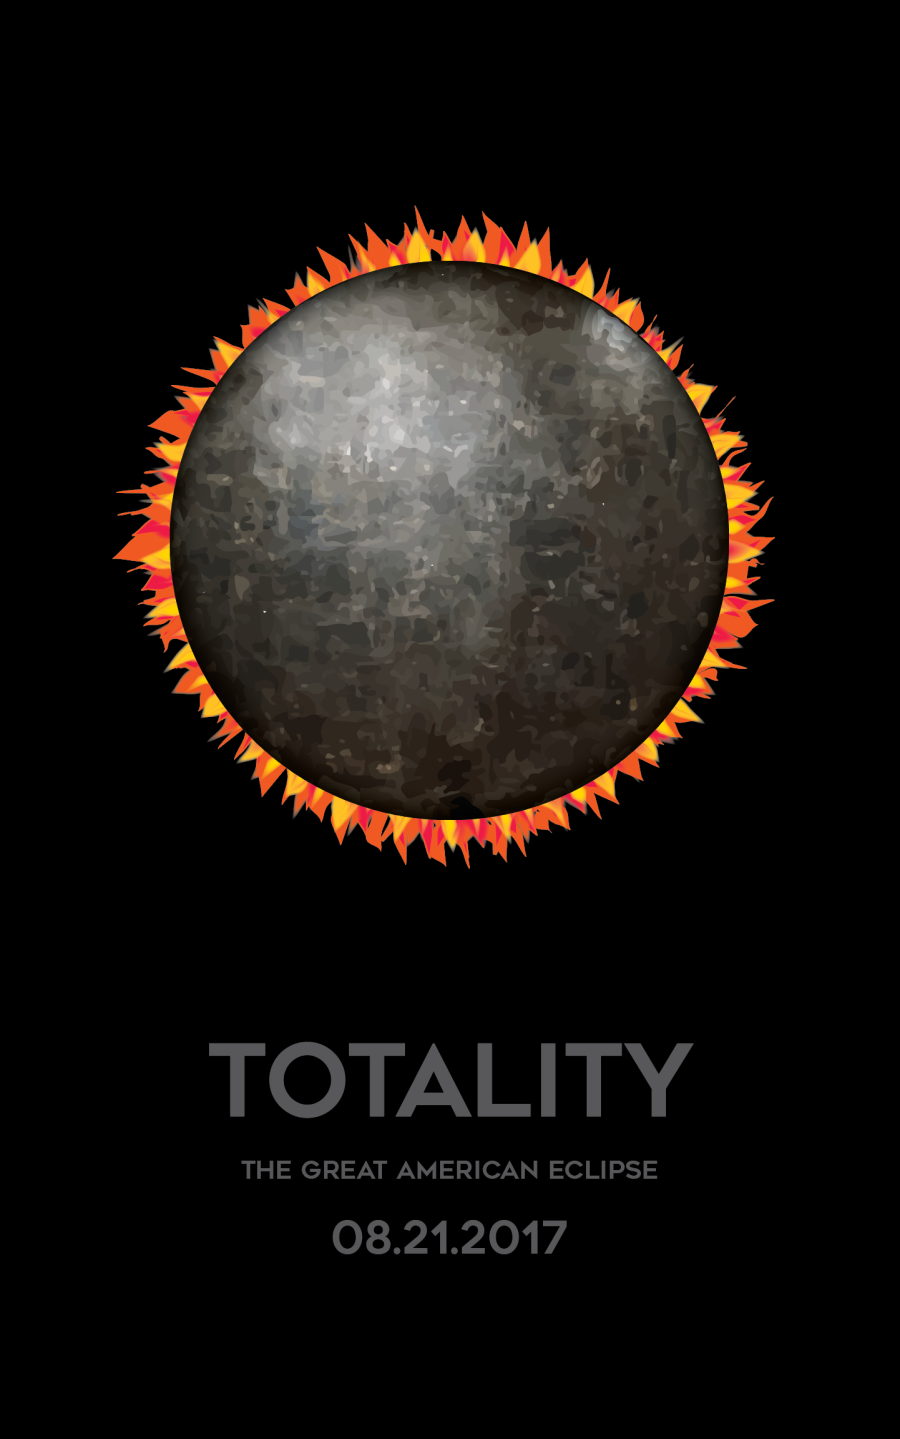 Totality: The Great American Eclipse